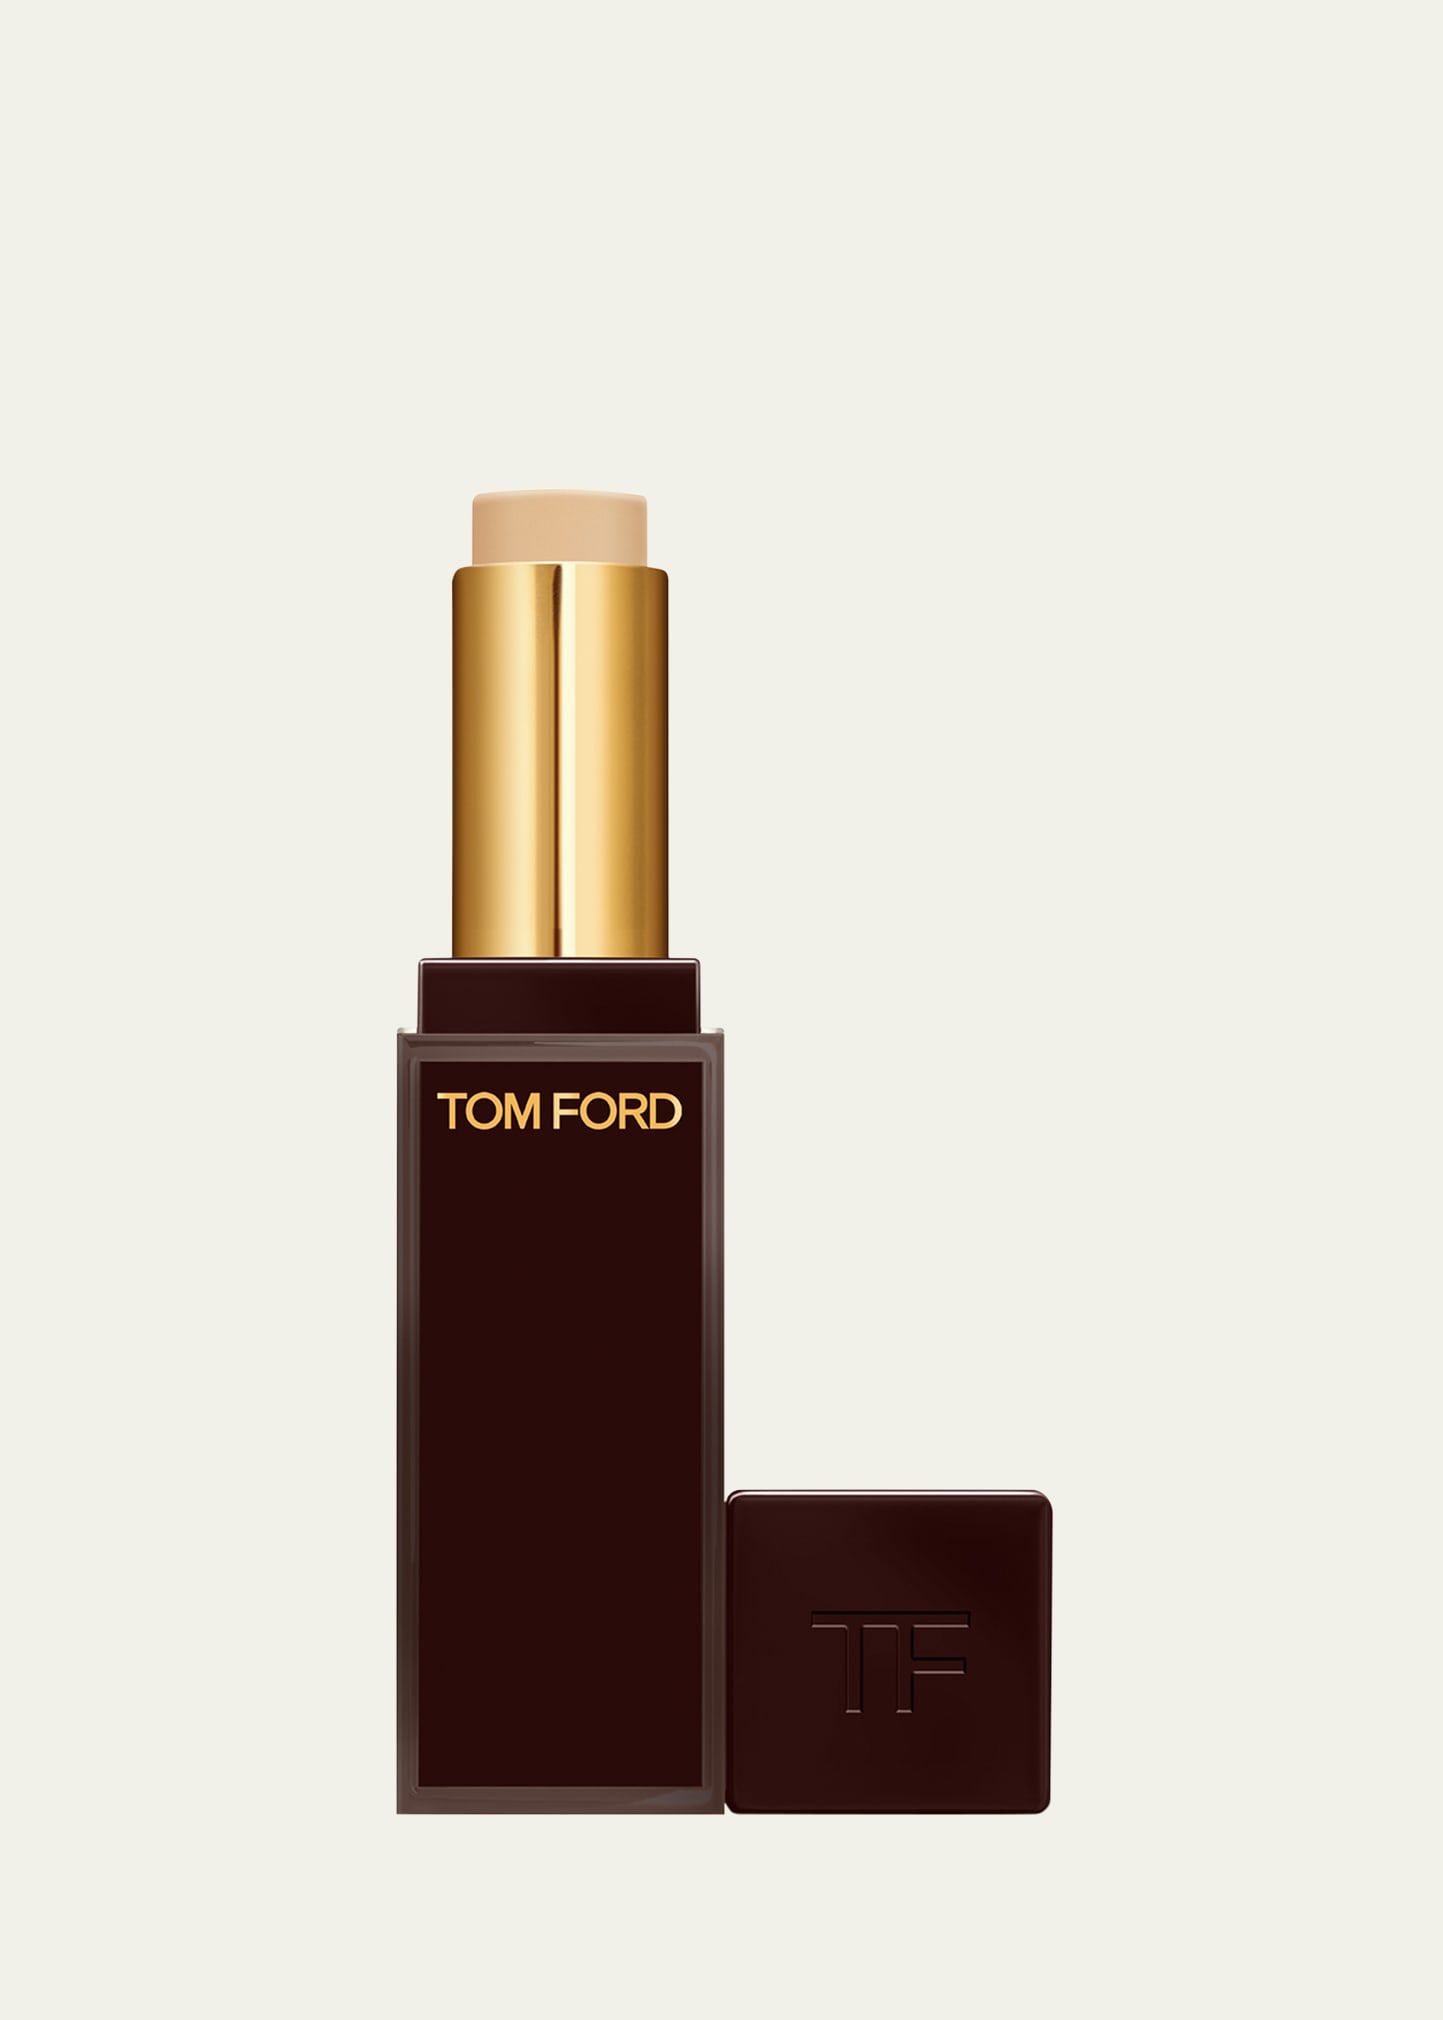 Tom Ford Traceless Soft Matte Concealer, 0.14 Oz. In 082w1 Taupe